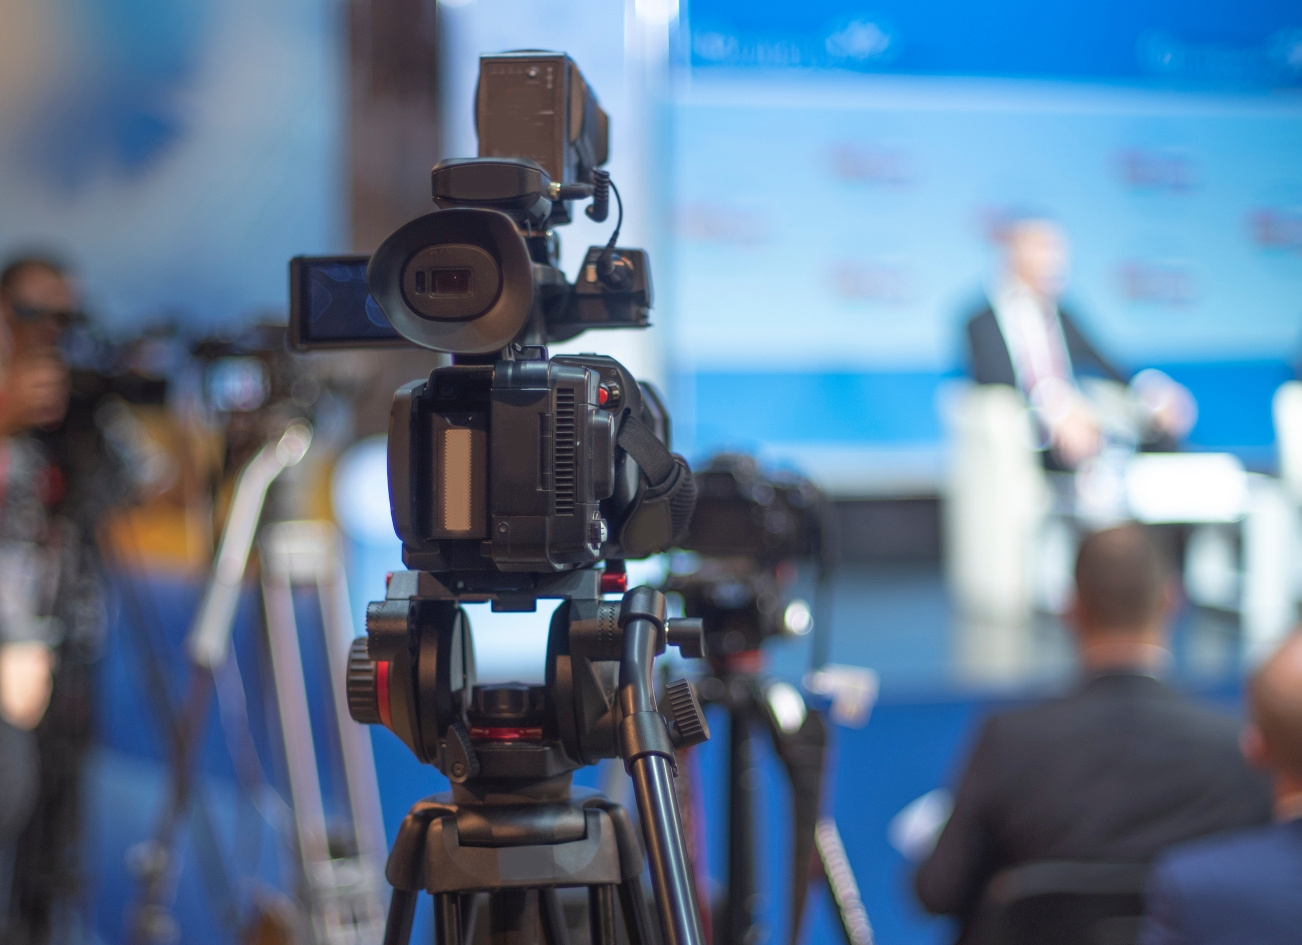 A camera directed towards a speaking situation in a conference room.